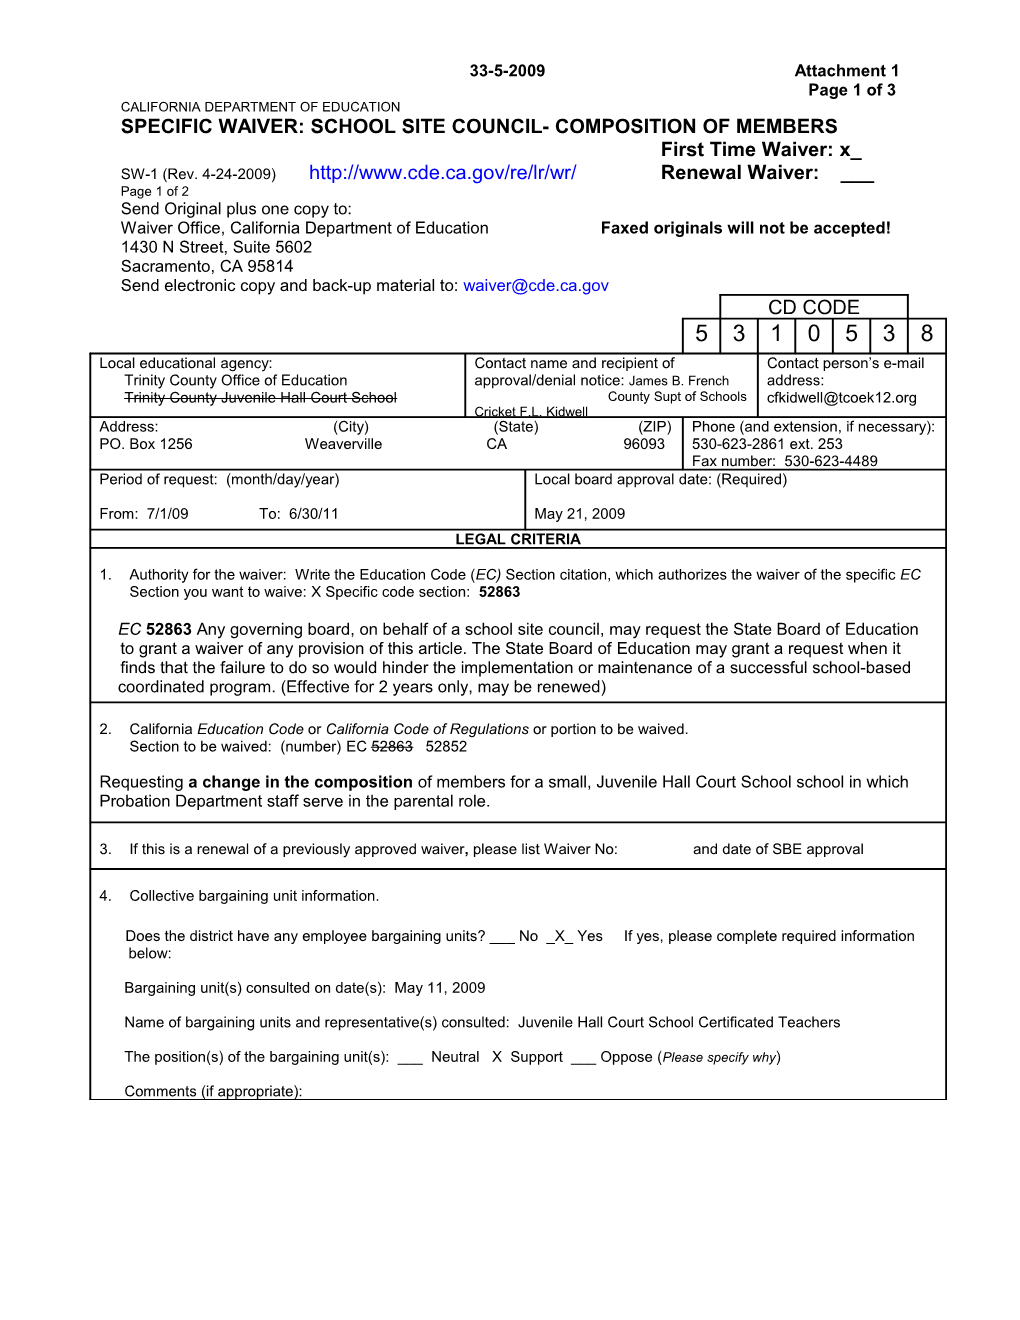 September 2009 Waiver Item W11 Attachment 1 - Meeting Agendas (CA State Board of Education)